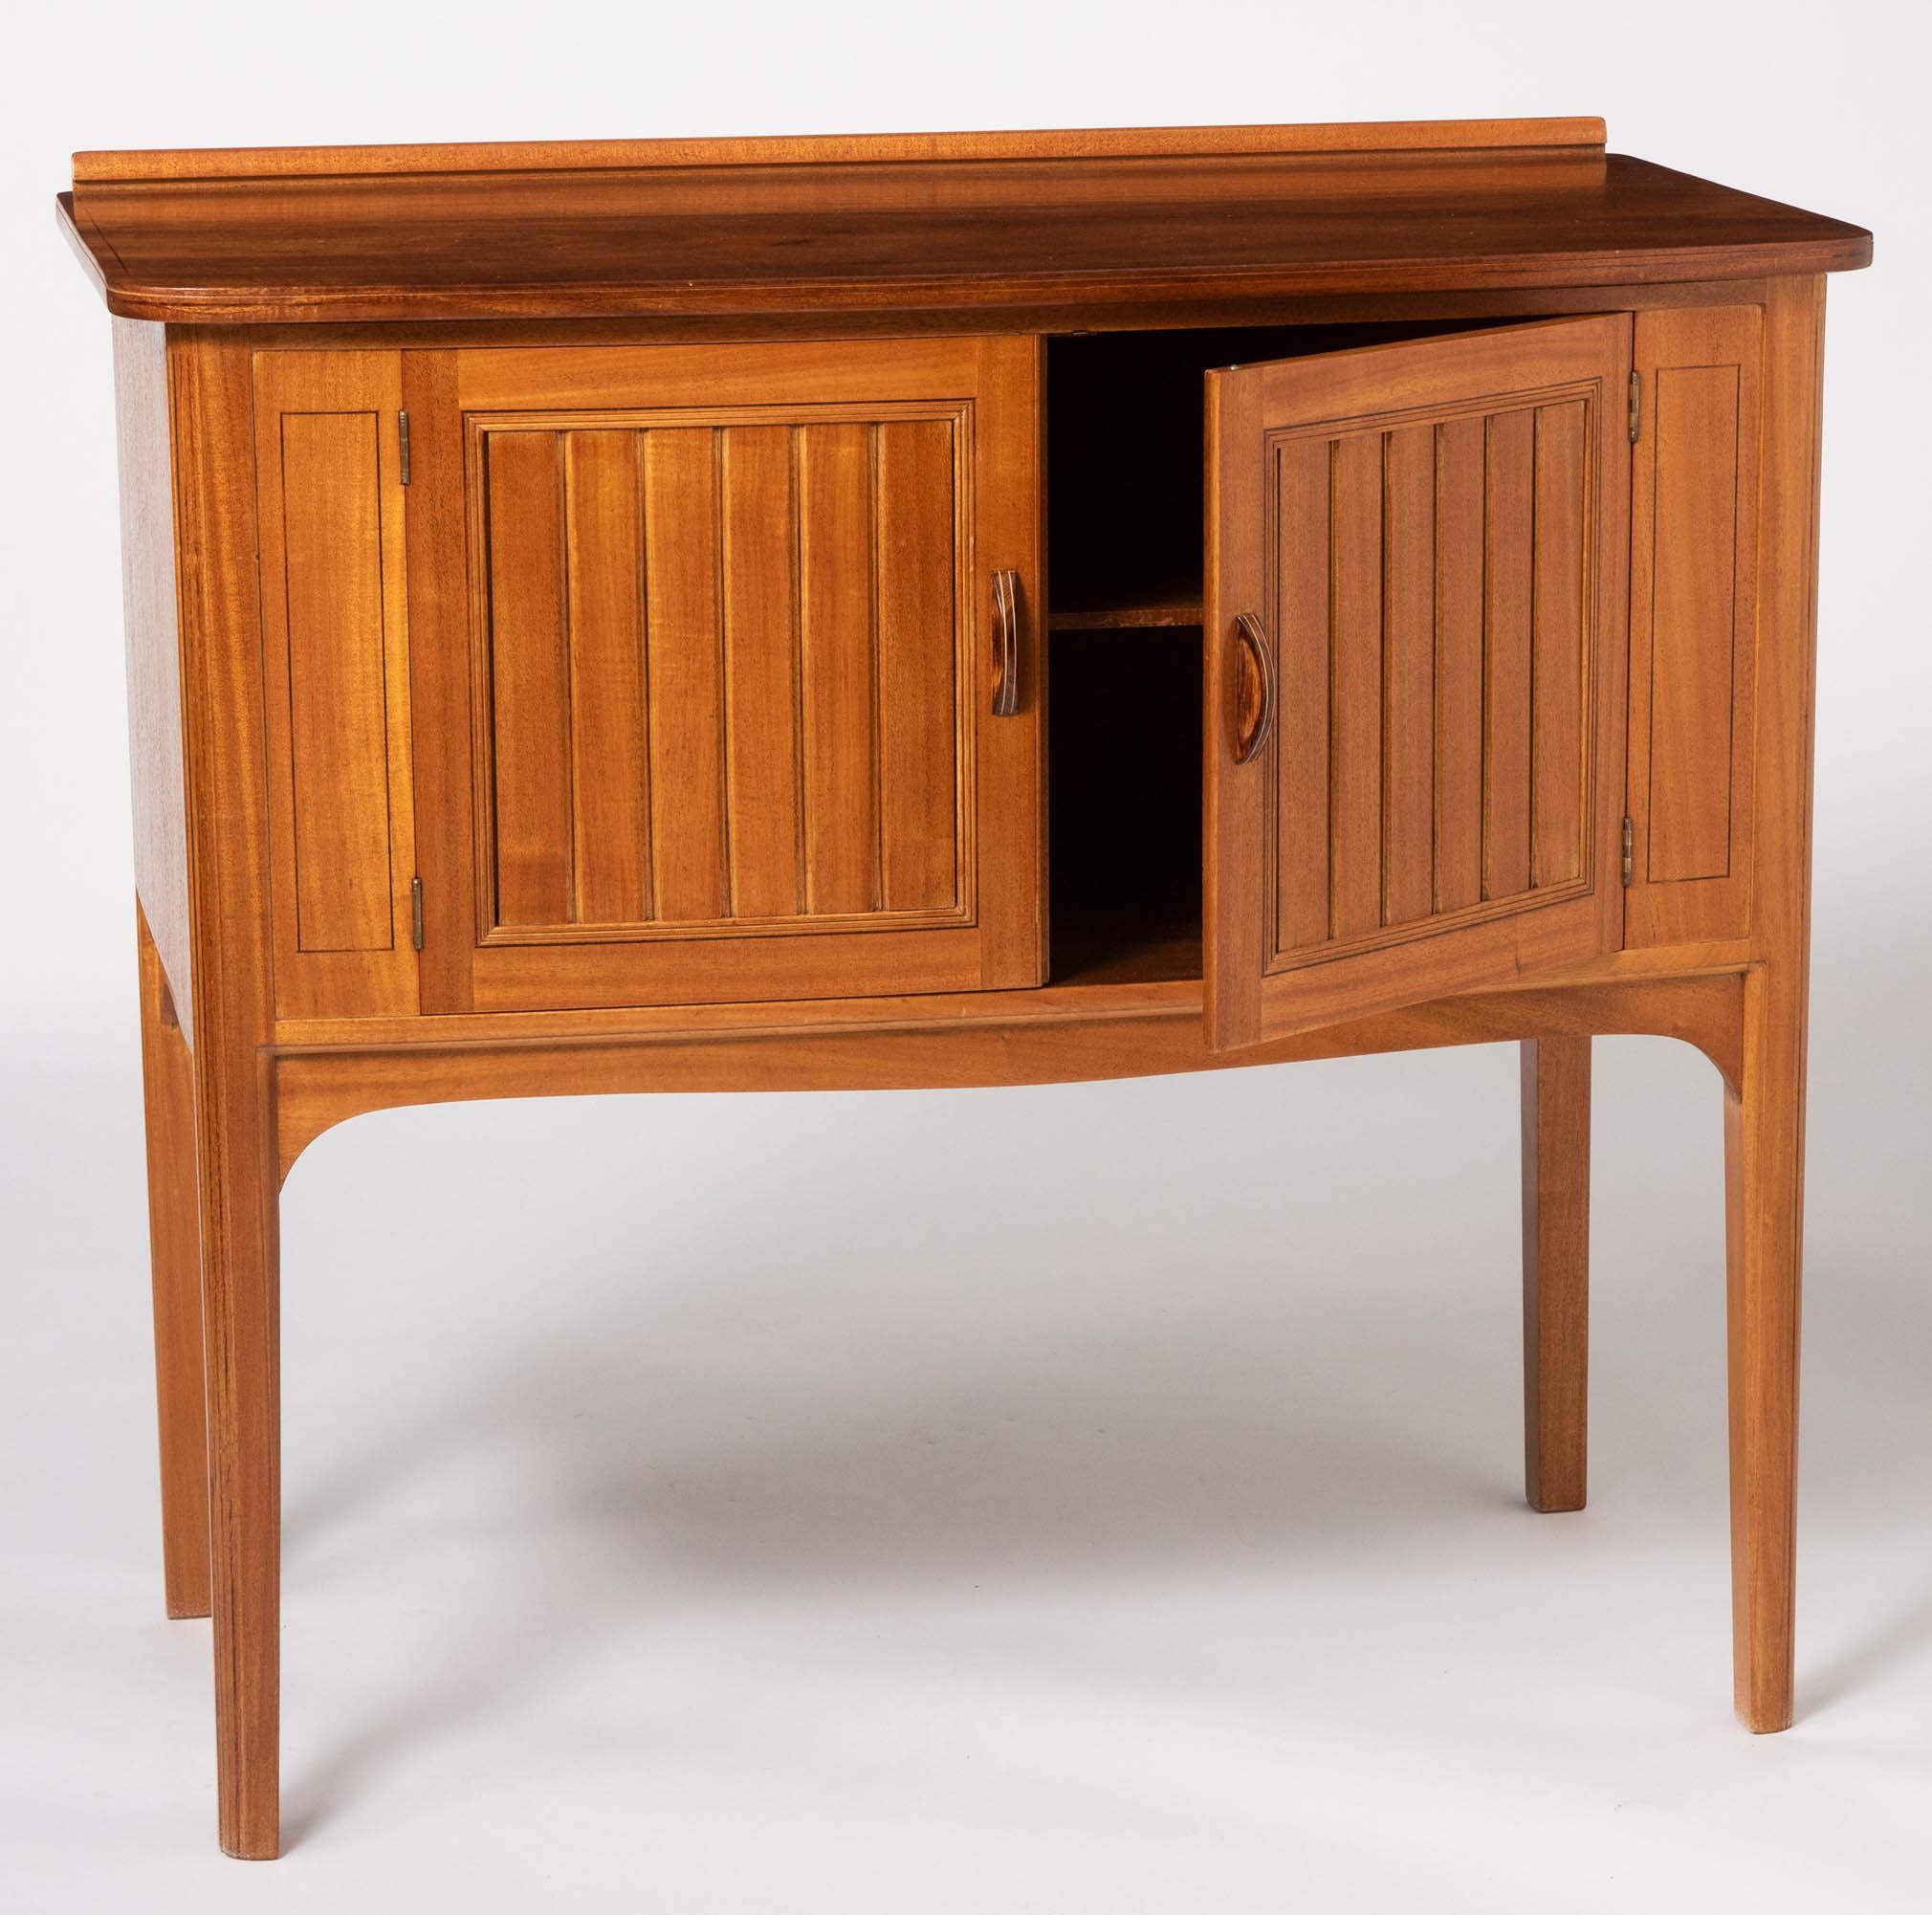 Pair of African Mahogany Side Cabinets by Edward Barnsley, England, circa 1956 (Englisch) im Angebot